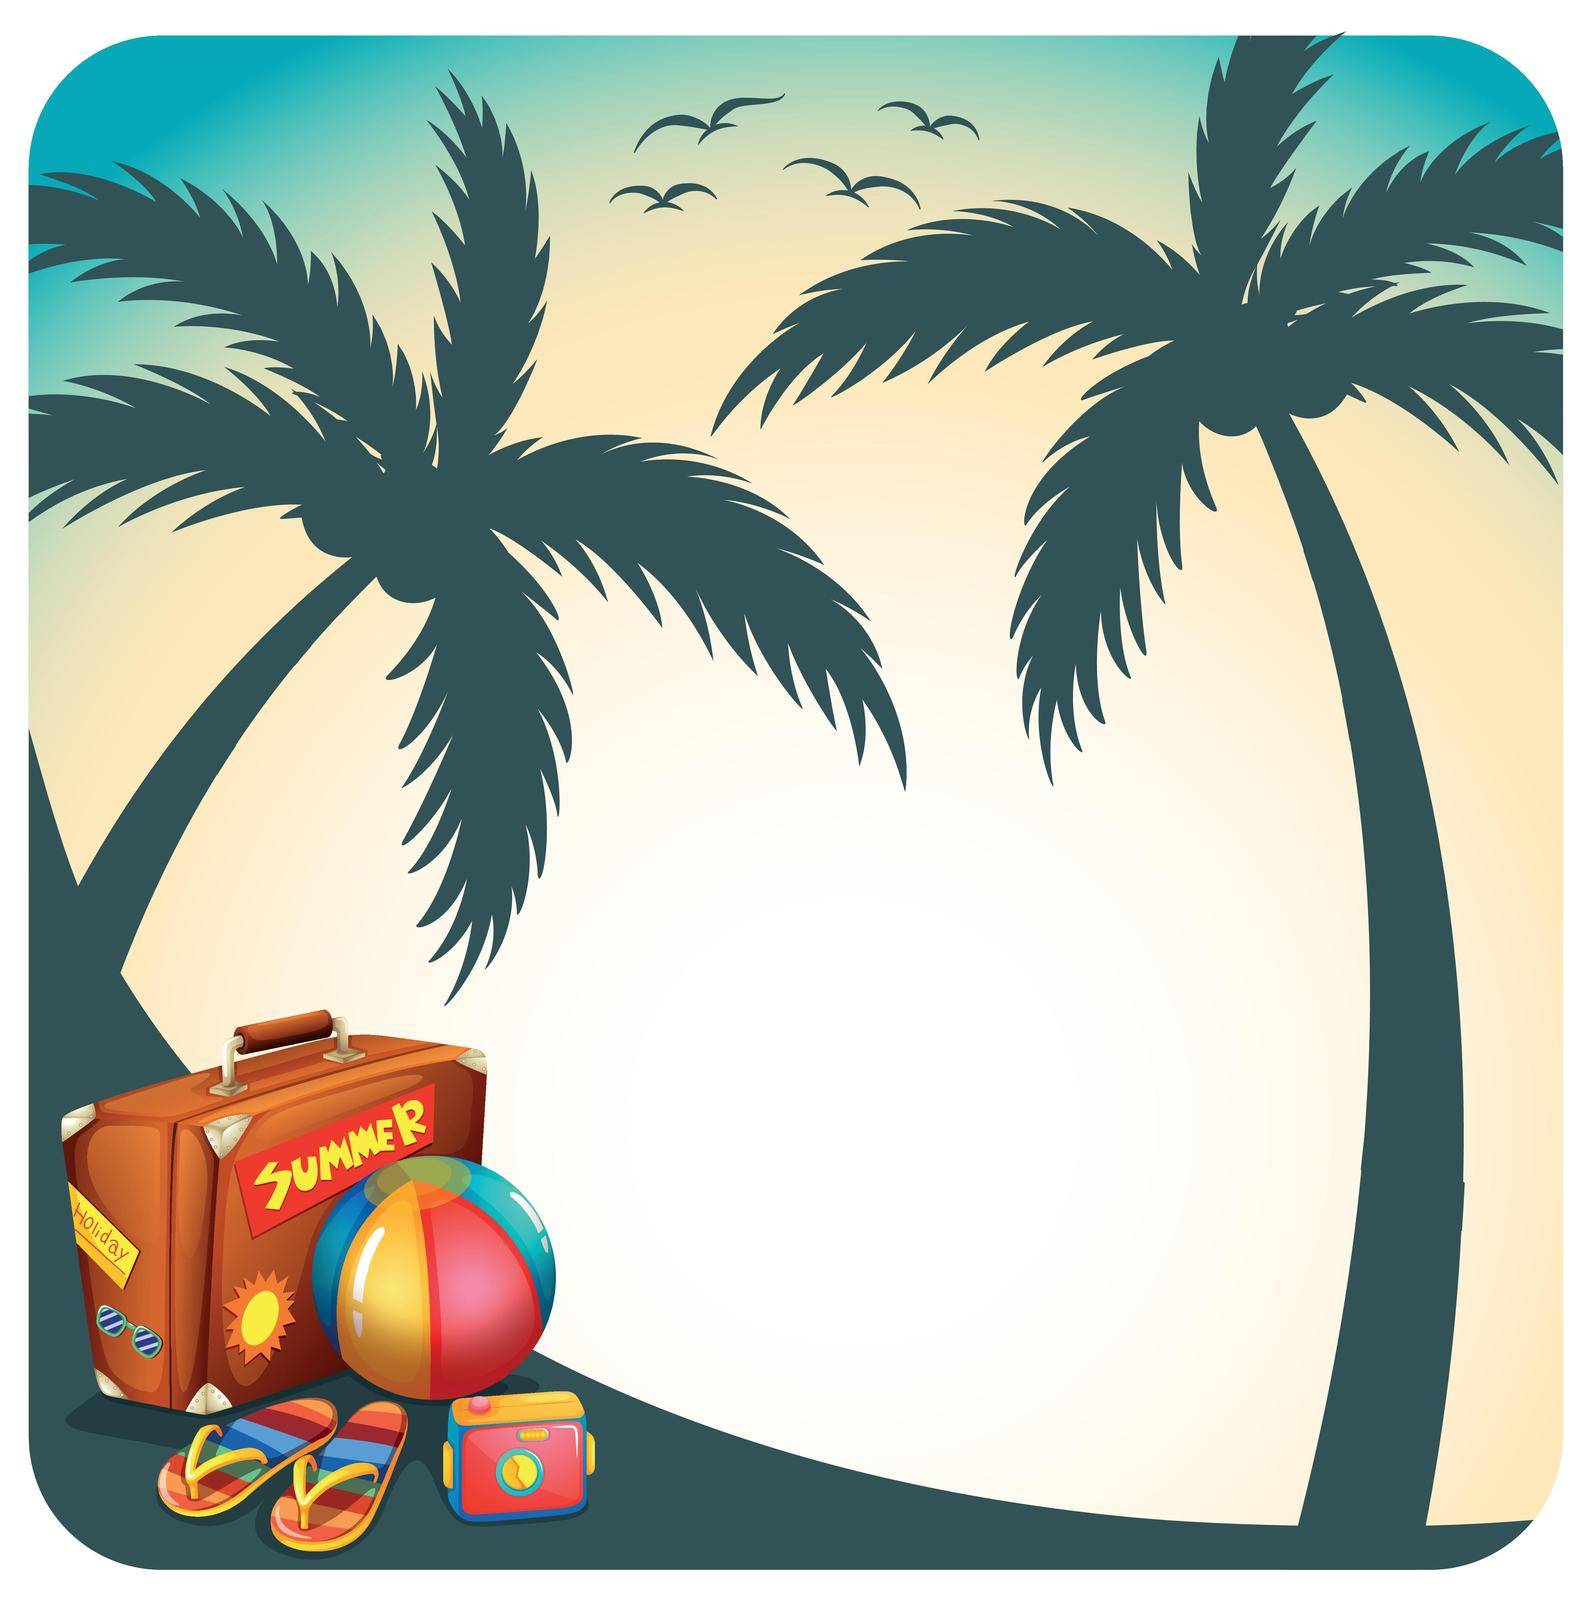 Scenery of coconut tree shadow with accessories for summer vacation